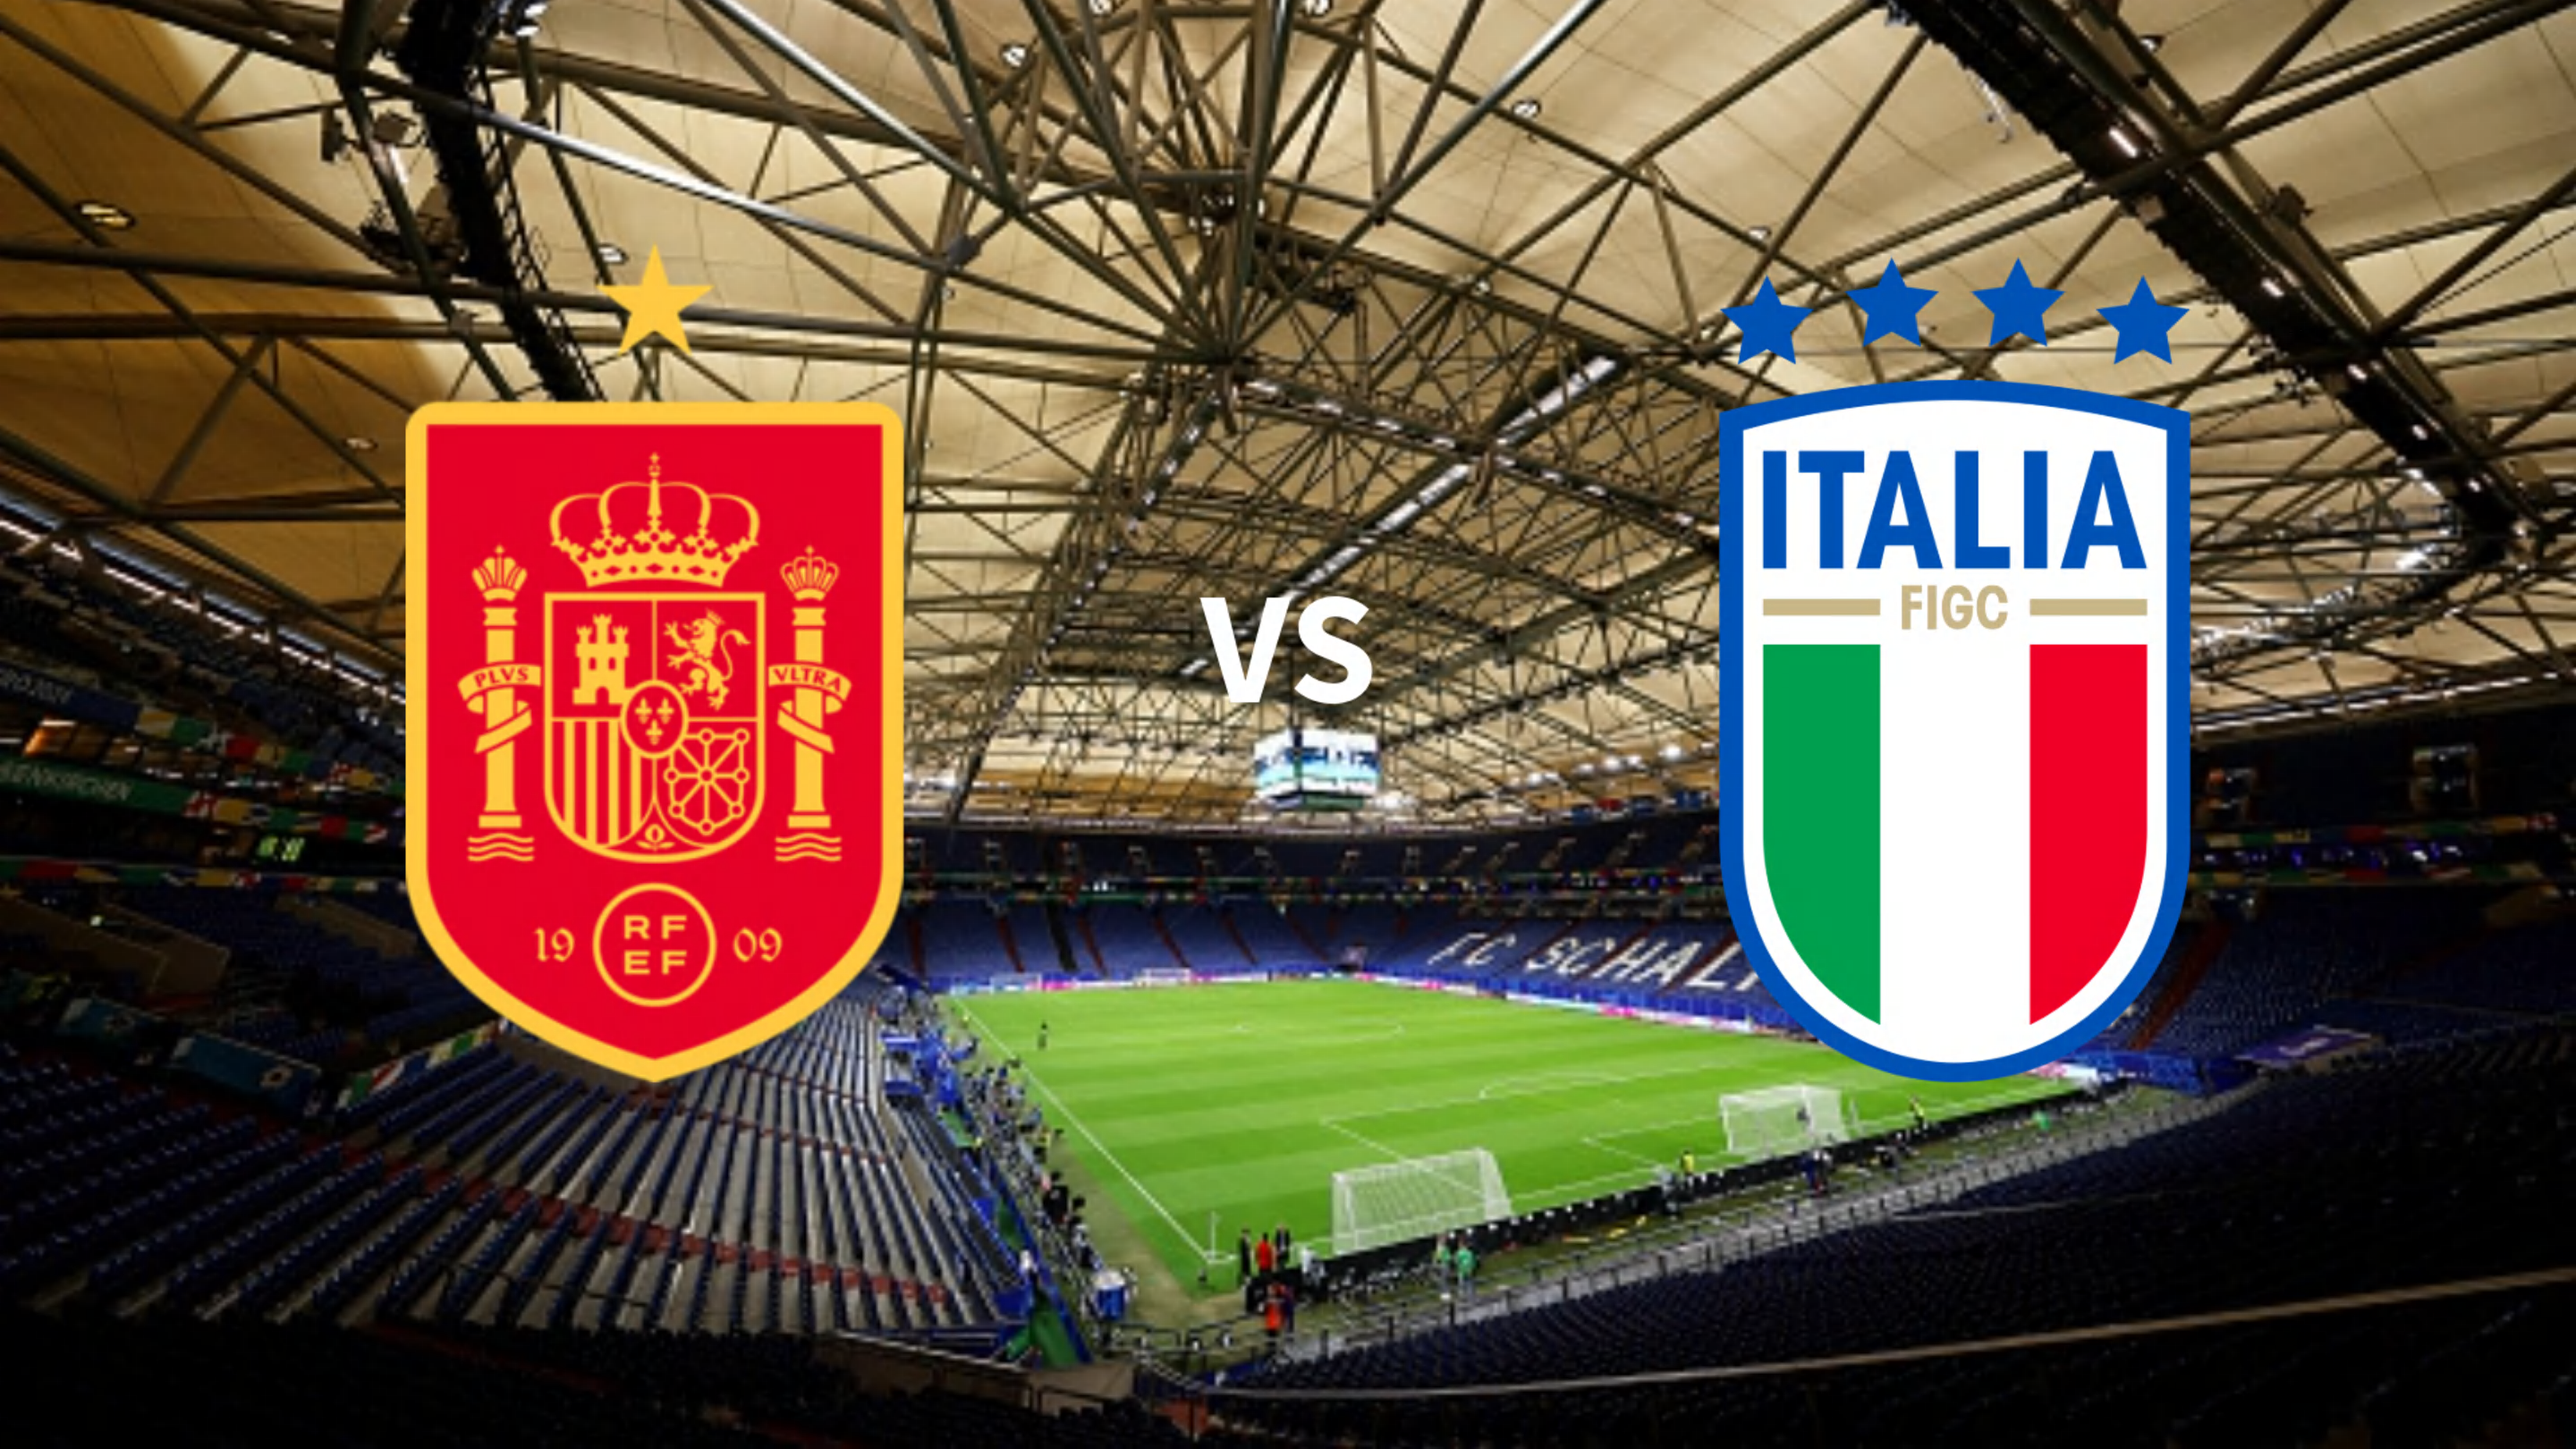 Spain vs Italy: Preview, predictions and lineups